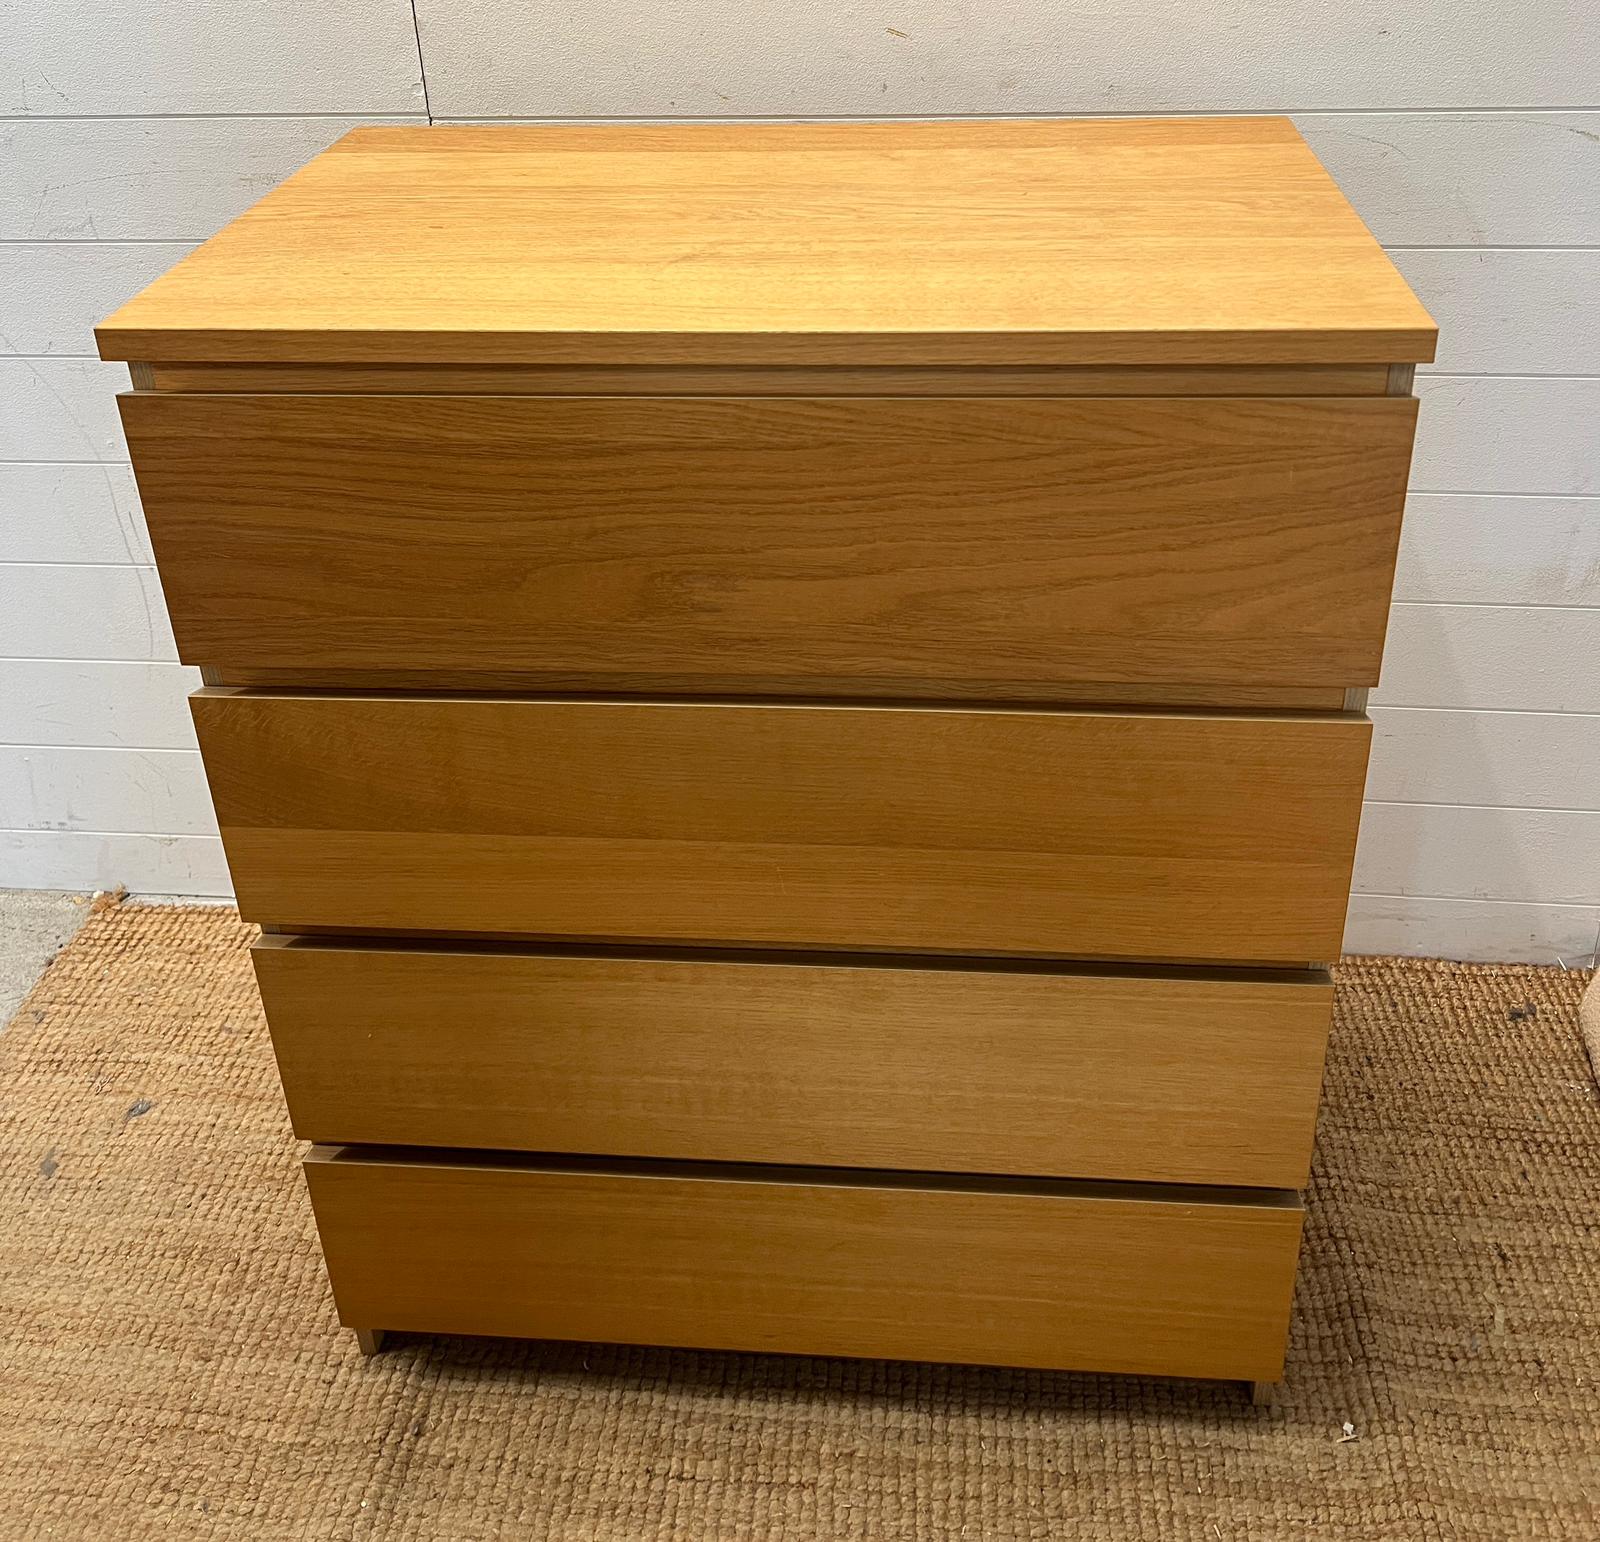 An Ikea Malm chest of drawers (H100cm W80cm D48cm) - Image 2 of 3